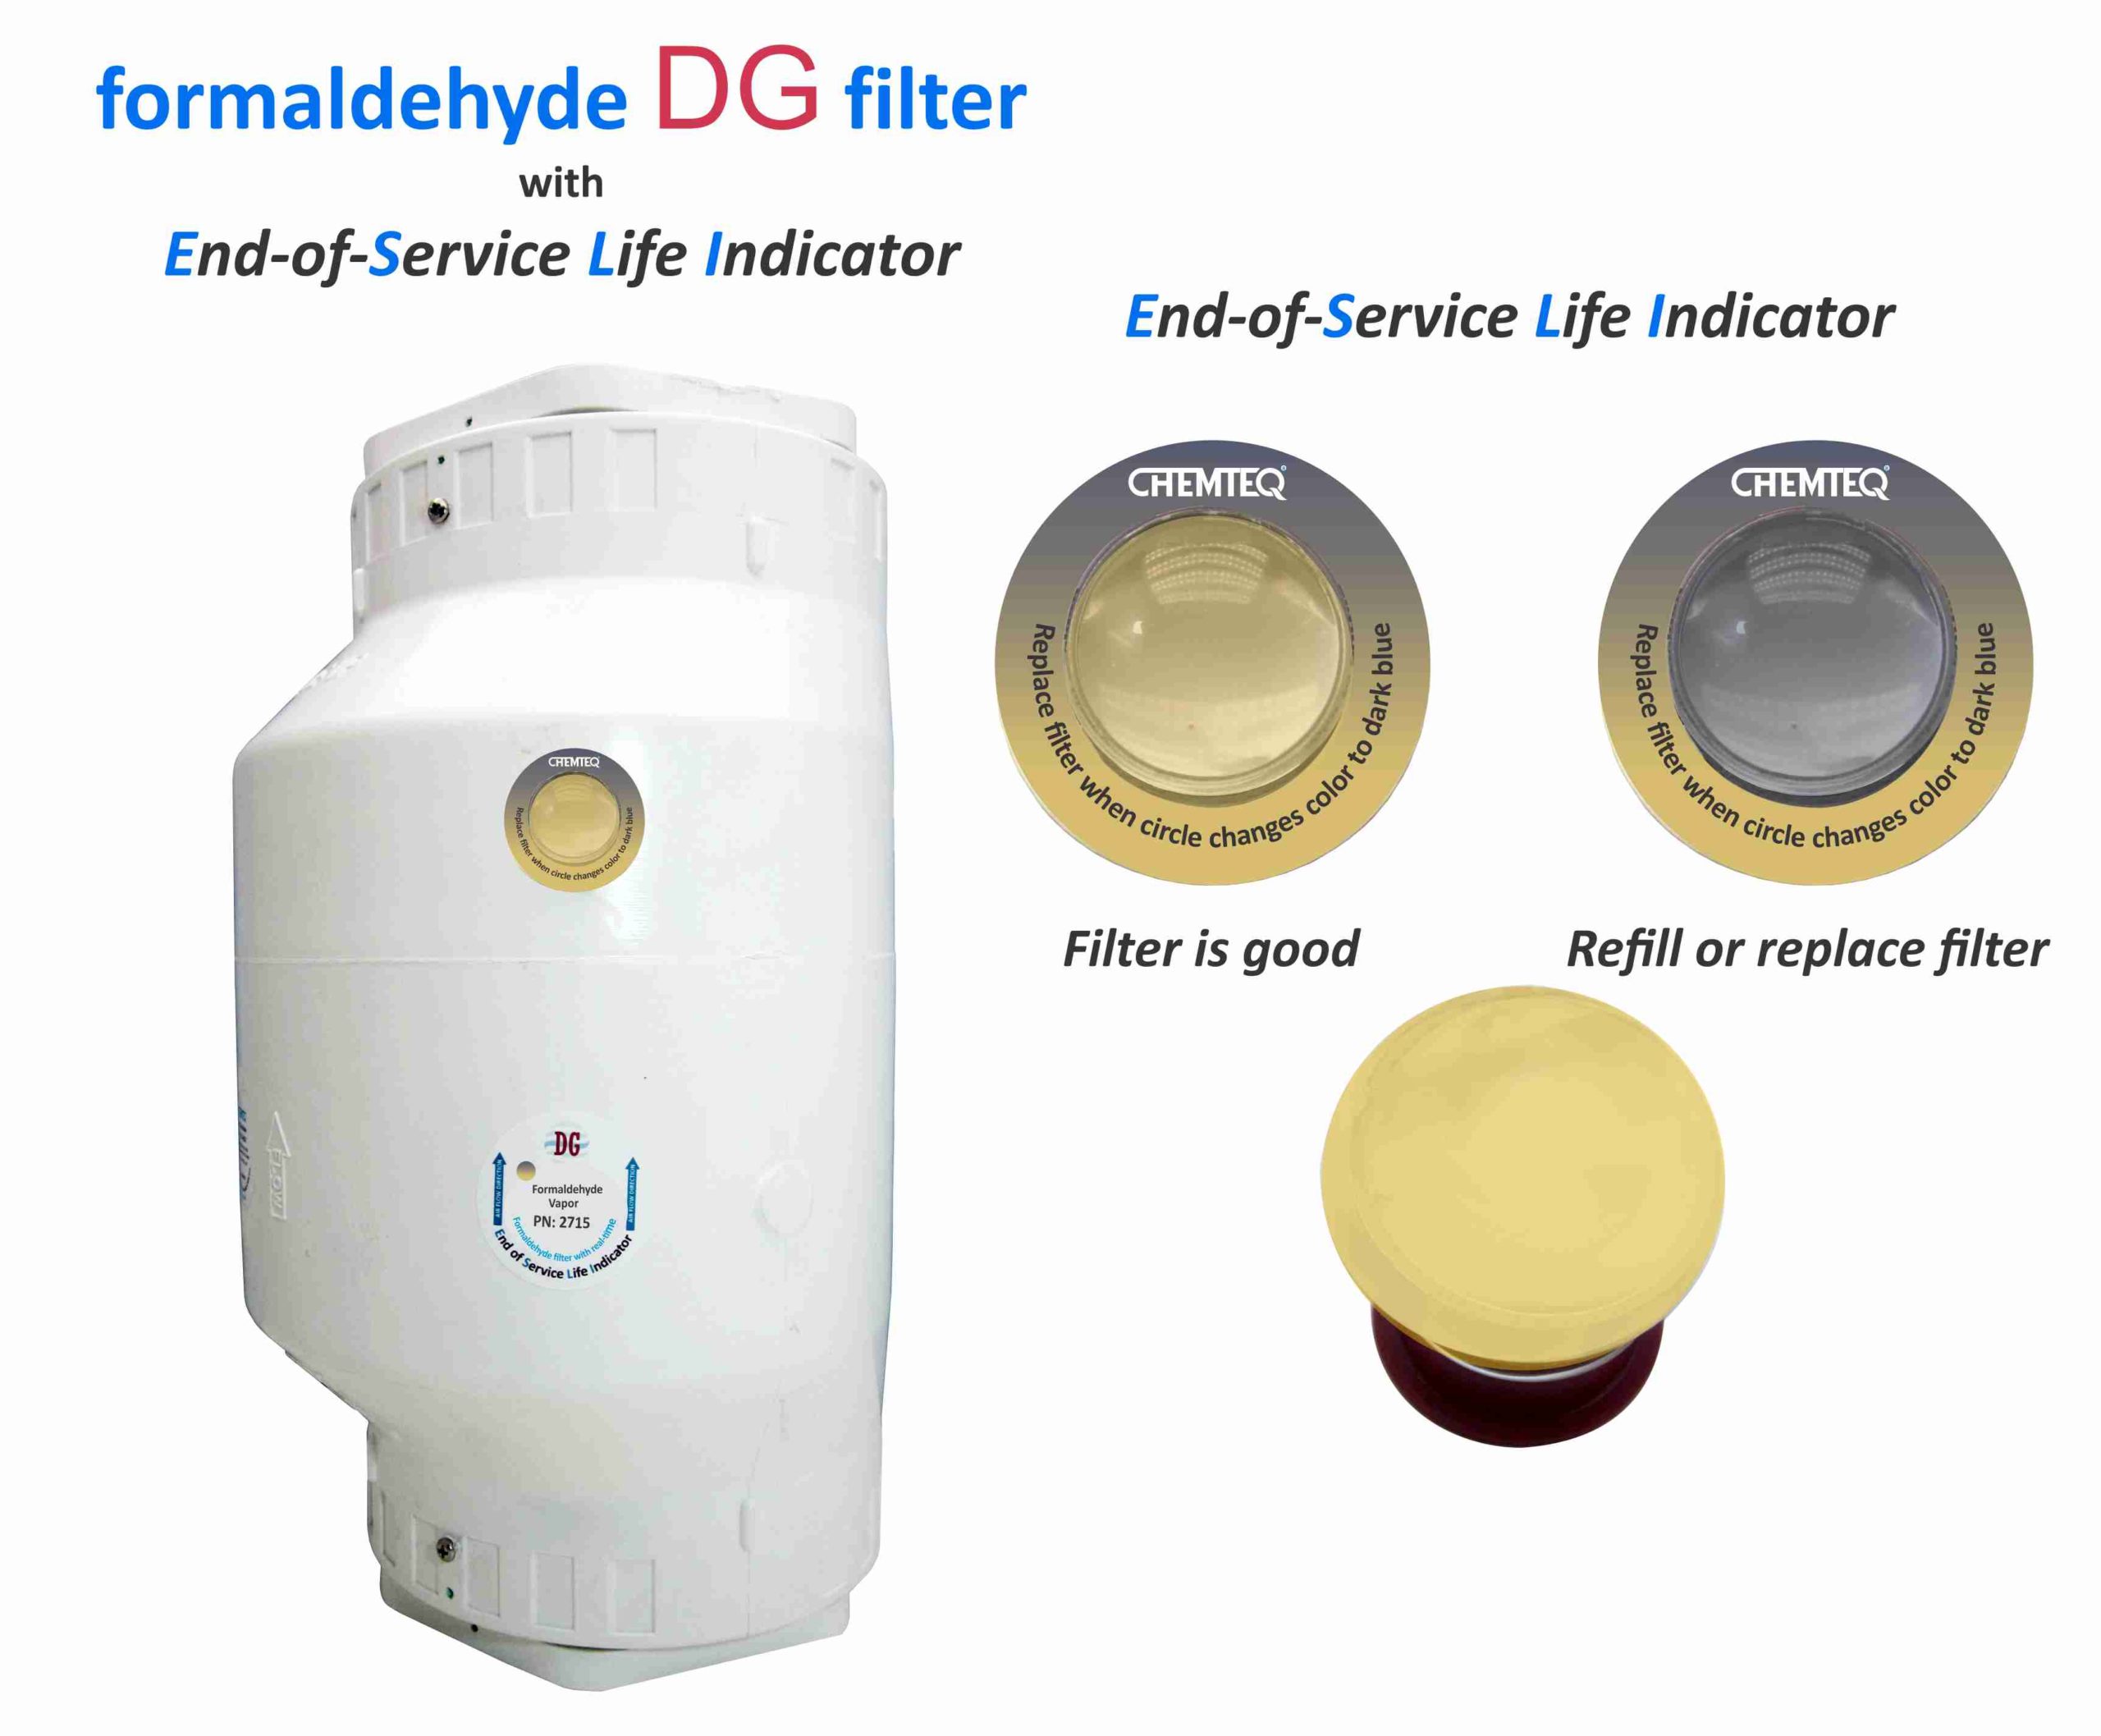 Formaldehyde DG FILTER-ESLI 2715. Formaldehyde filter with end-of-service life indicator suitable for chemical processes and reactor vents.